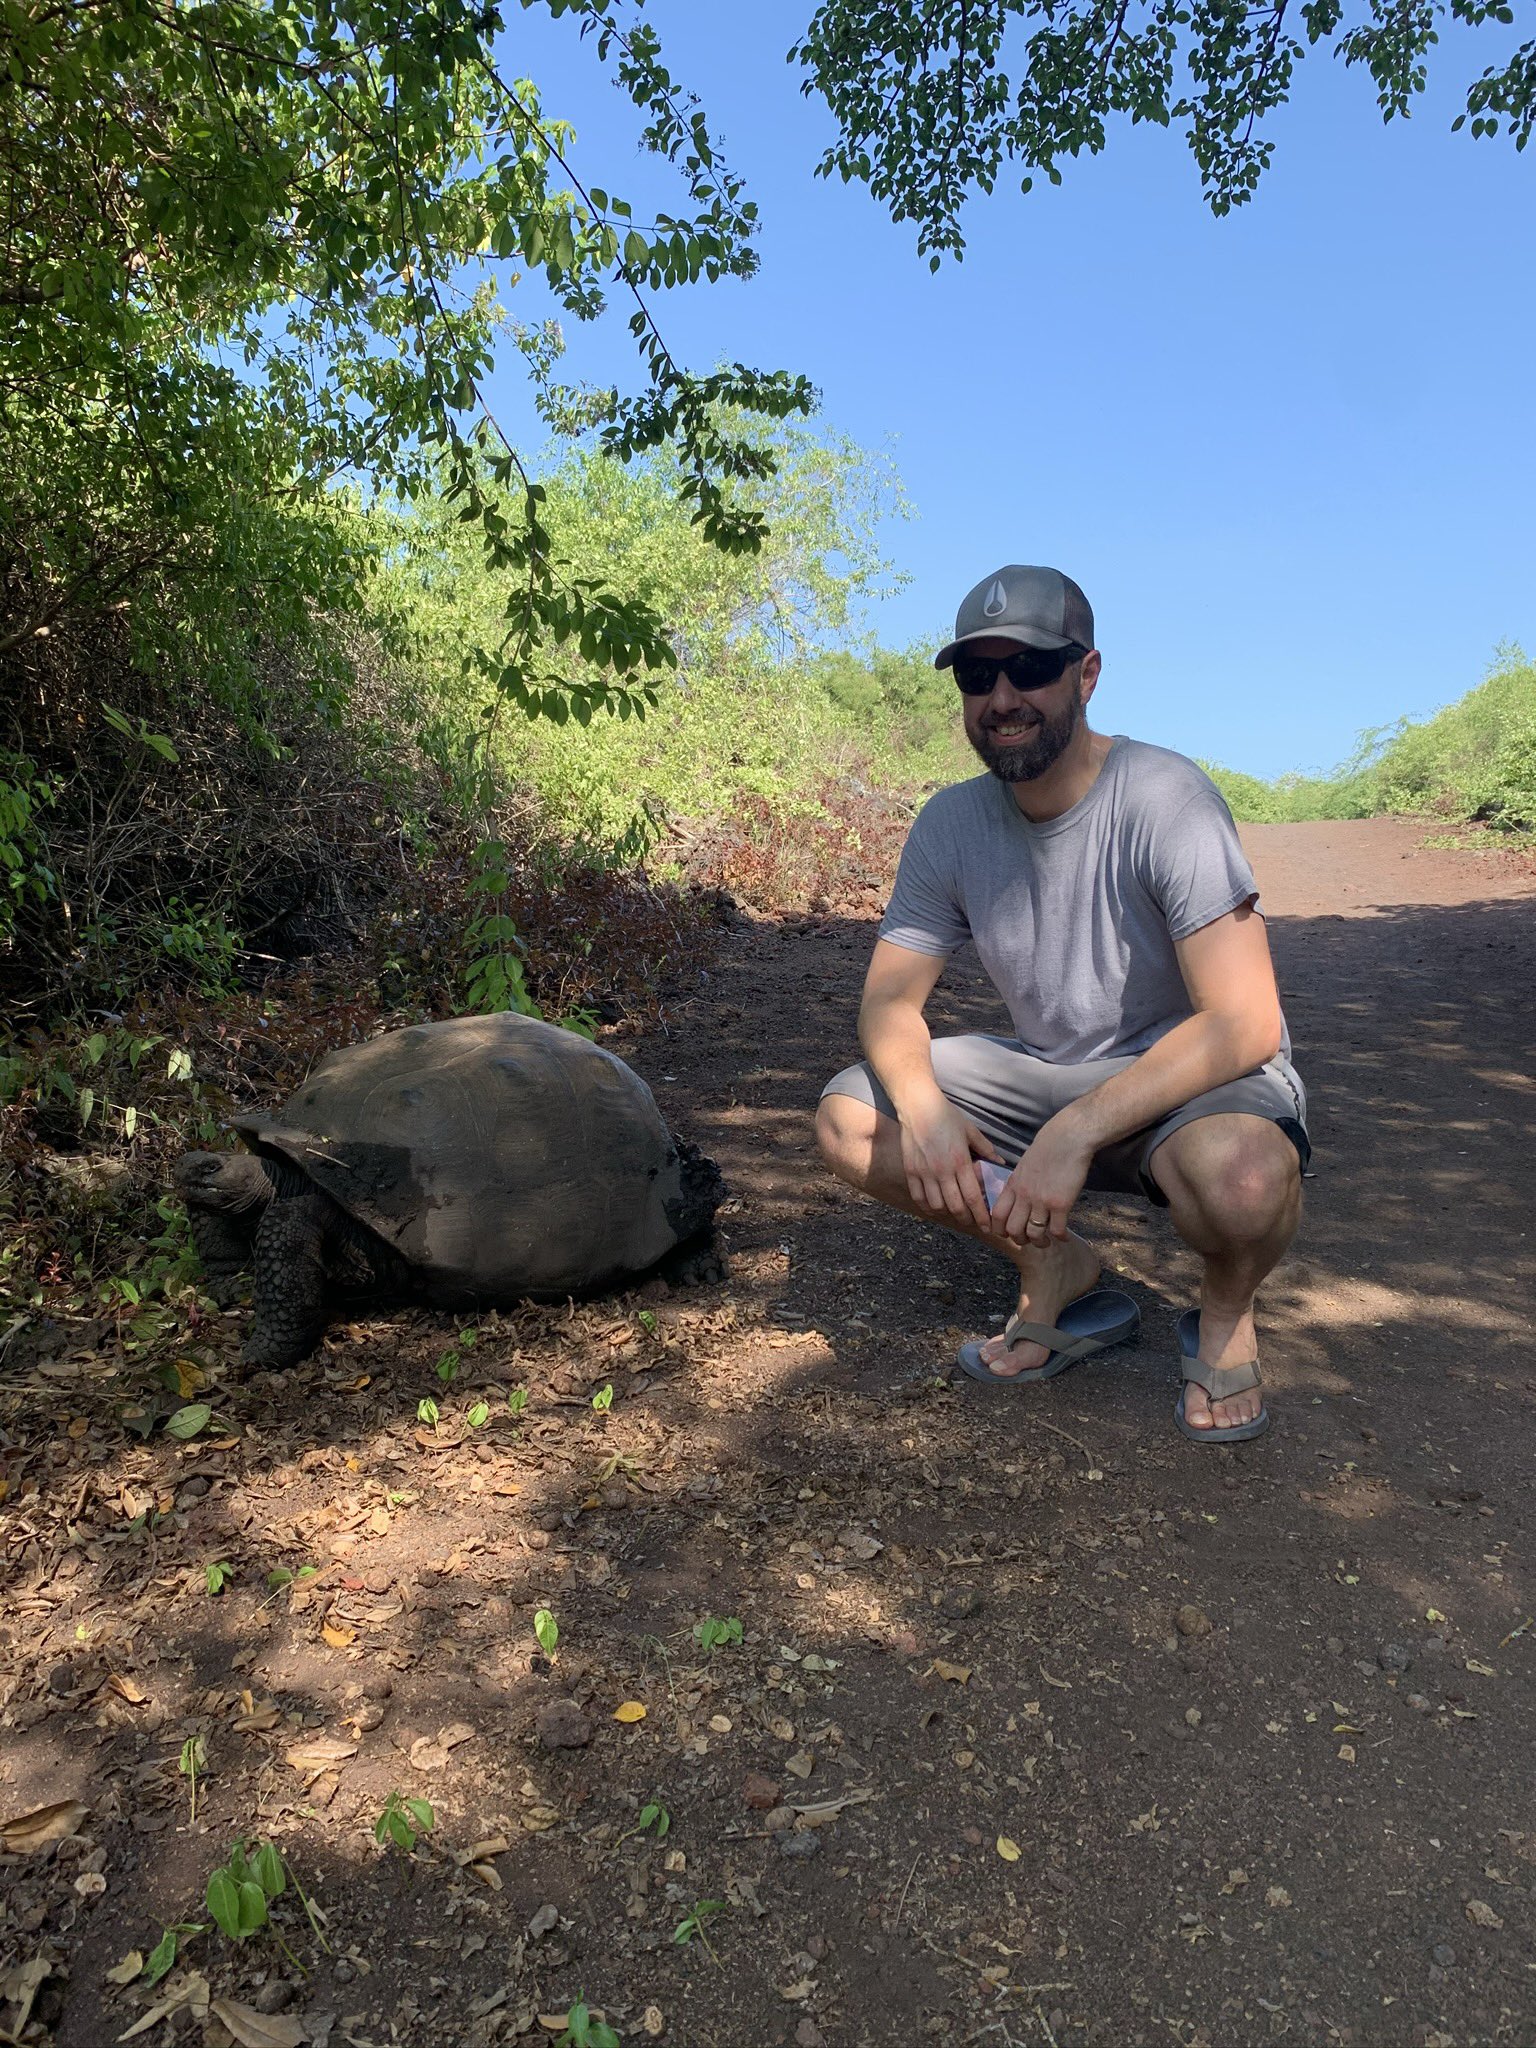 Me and a Turtle in Galapagos Islands